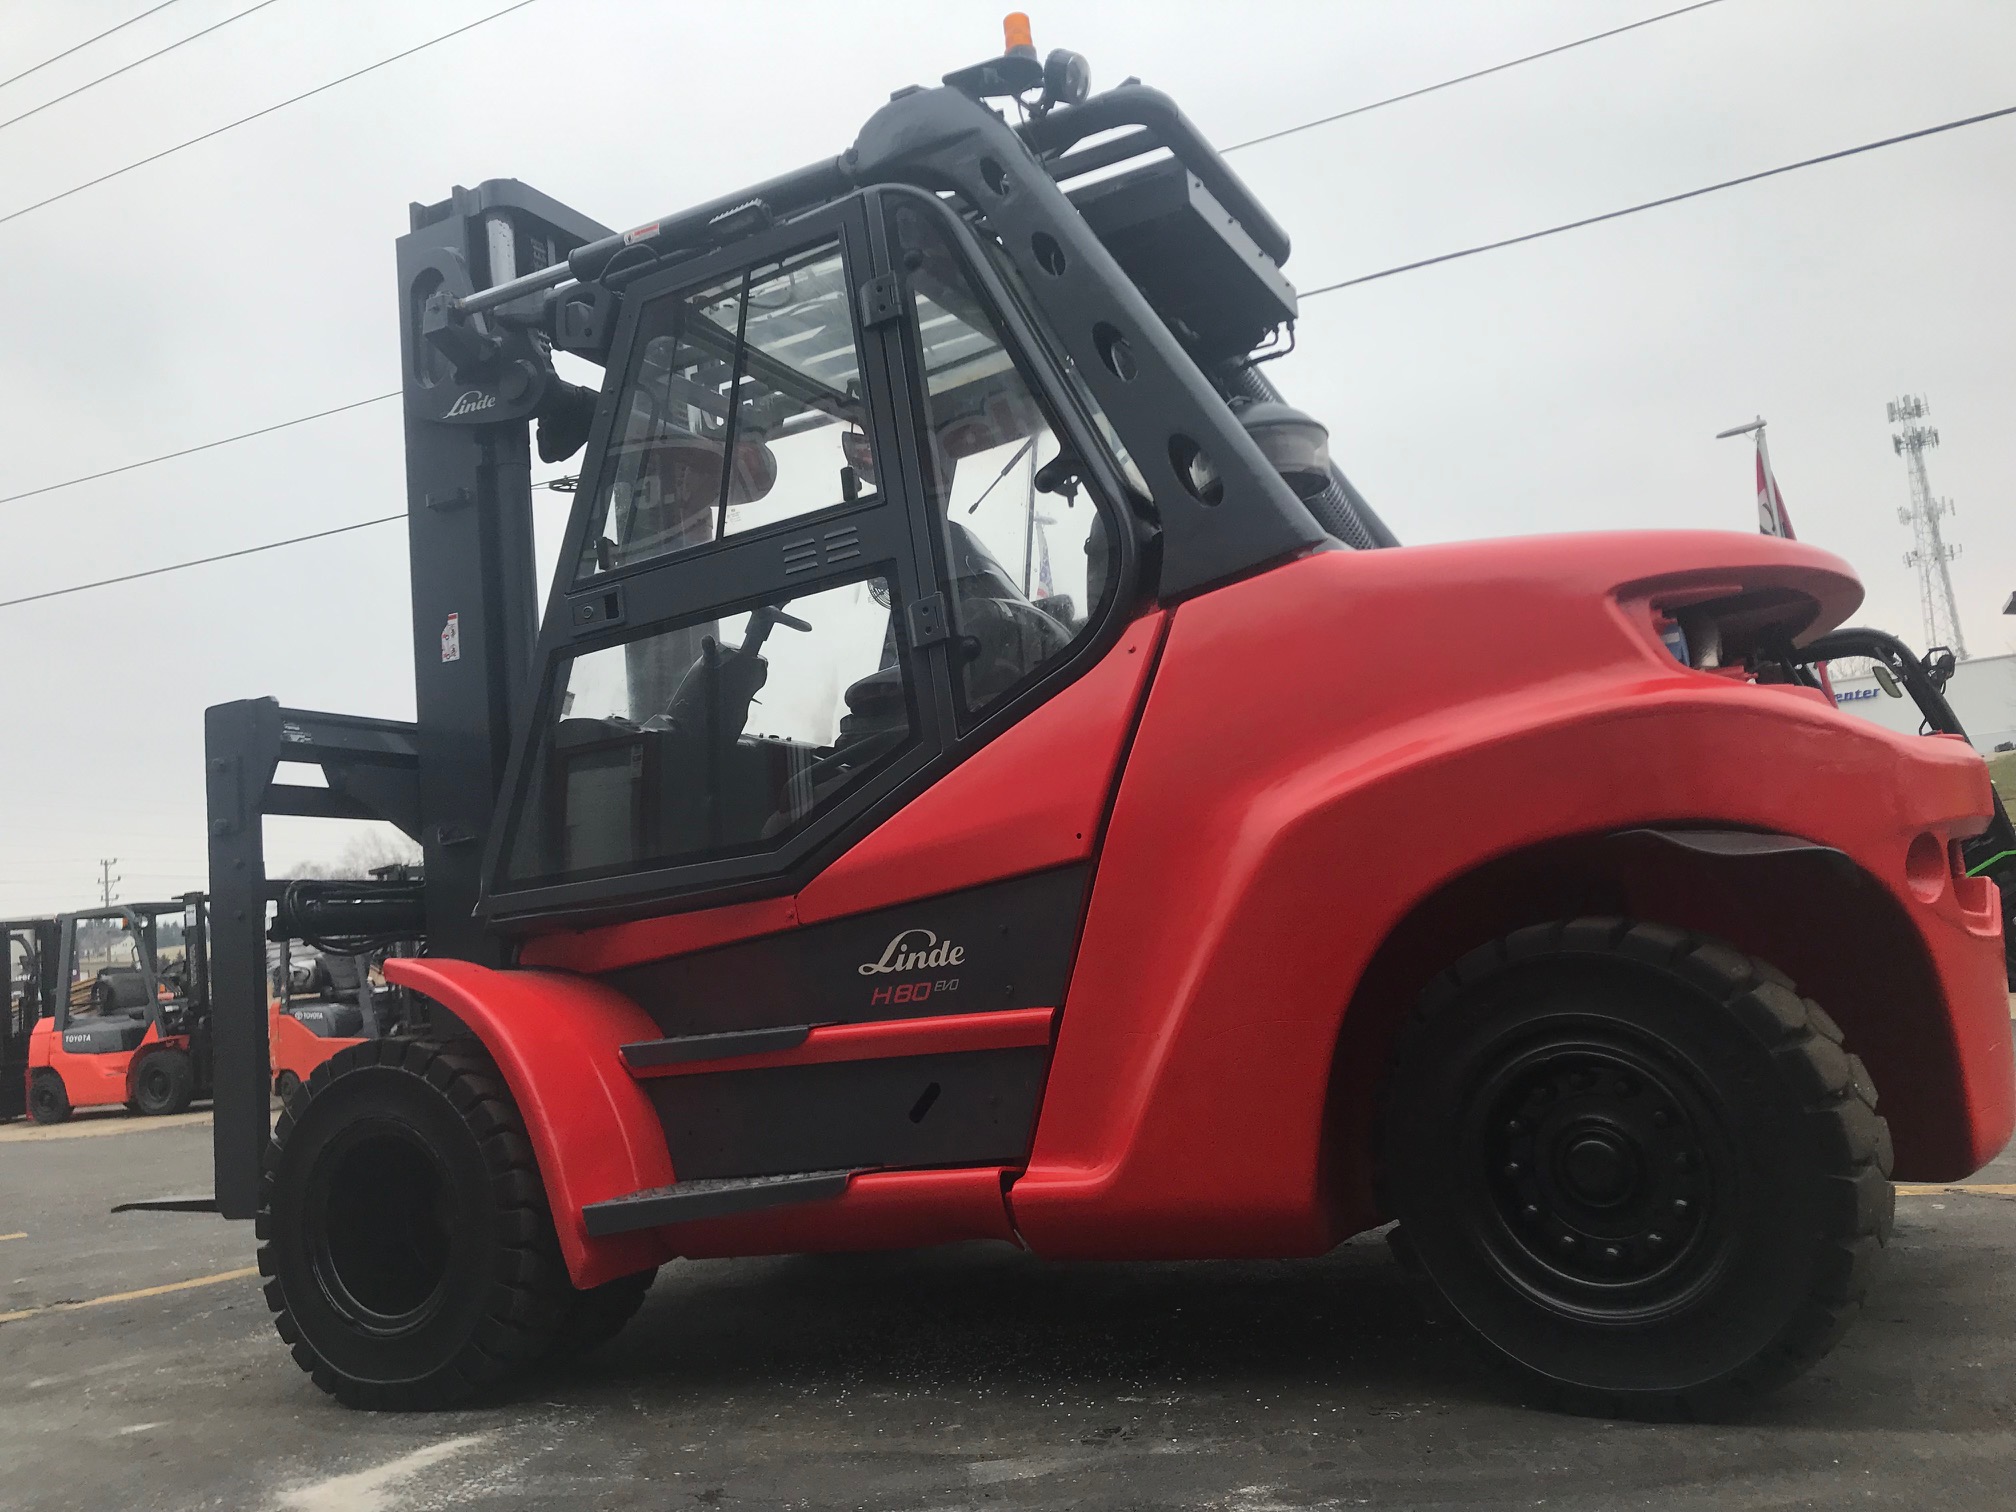 Red linde forklift with 17,000lb capacity